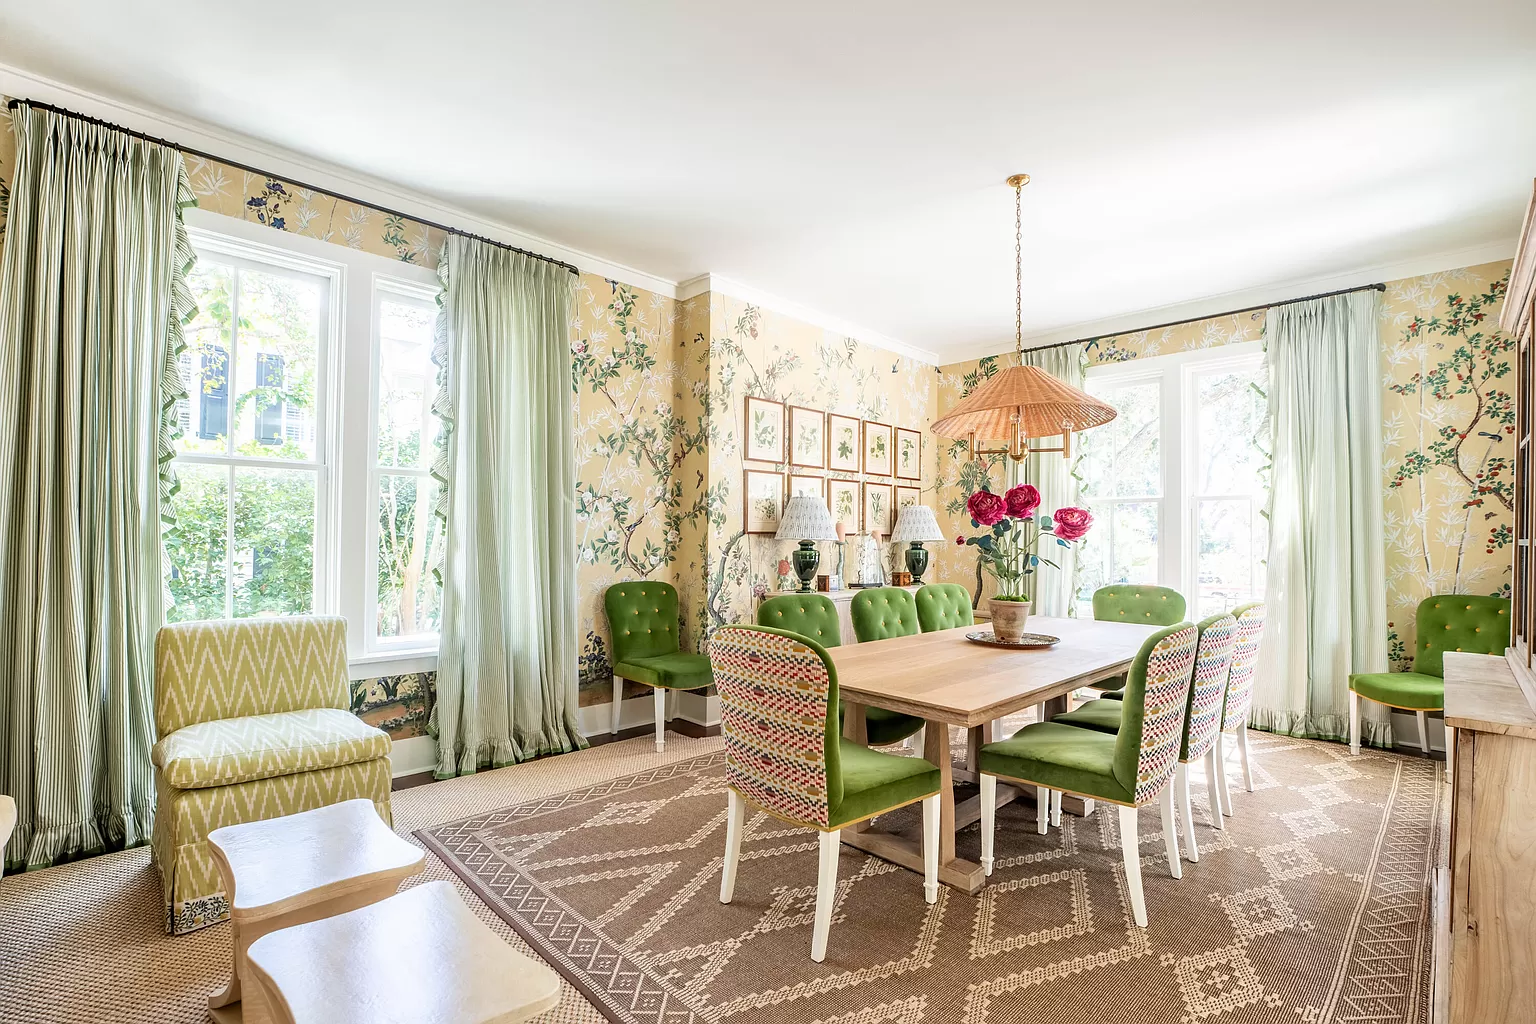 Dining room traditional decor showcasing vibrant blue and green featured in Julia Berolzheimer home tour